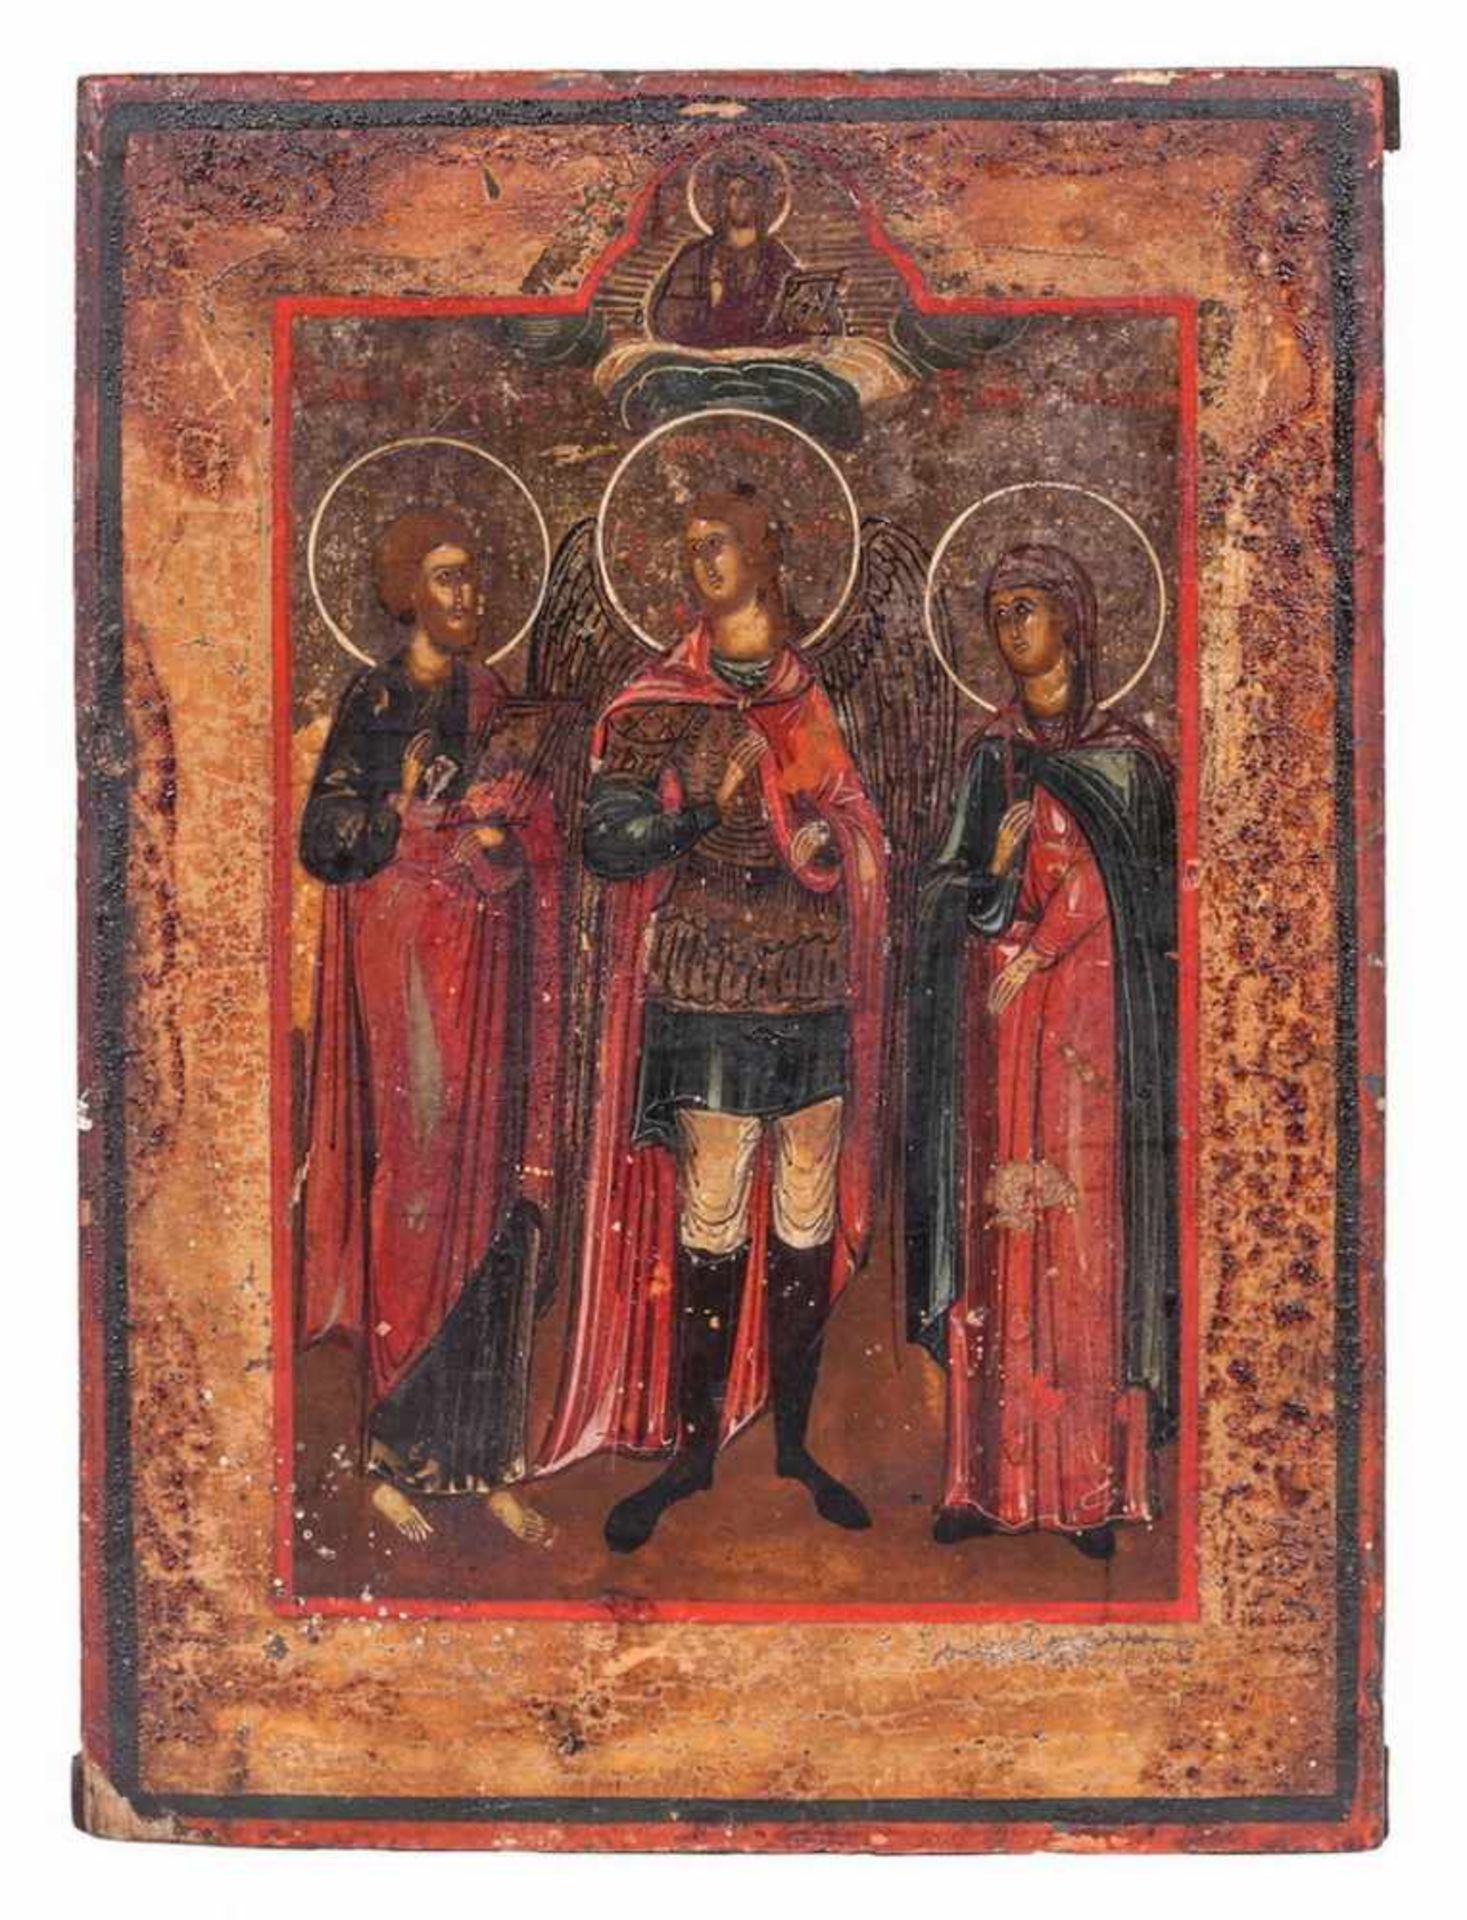 Russian icon ''St. Michael and two selected saints'. - 19th century - 23x17,5 cm.